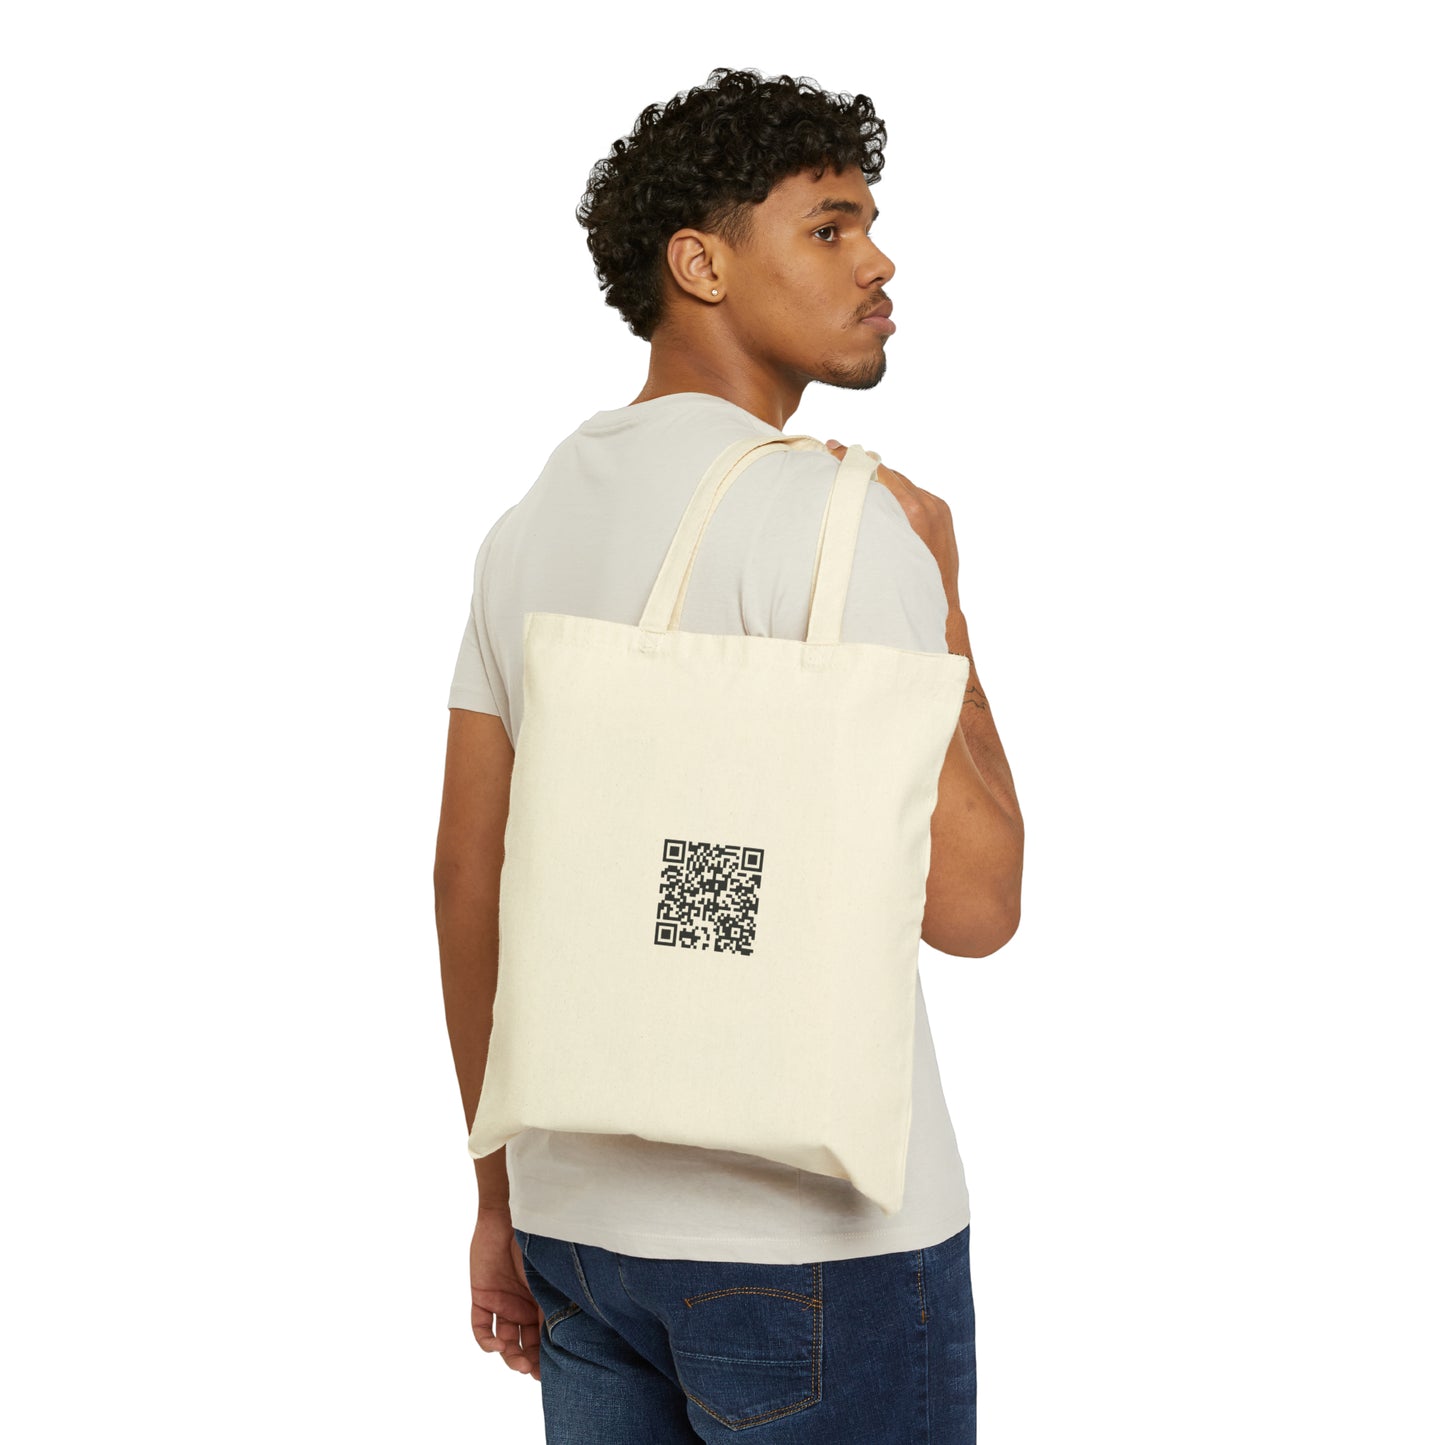 Standing in Shadows - Cotton Canvas Tote Bag